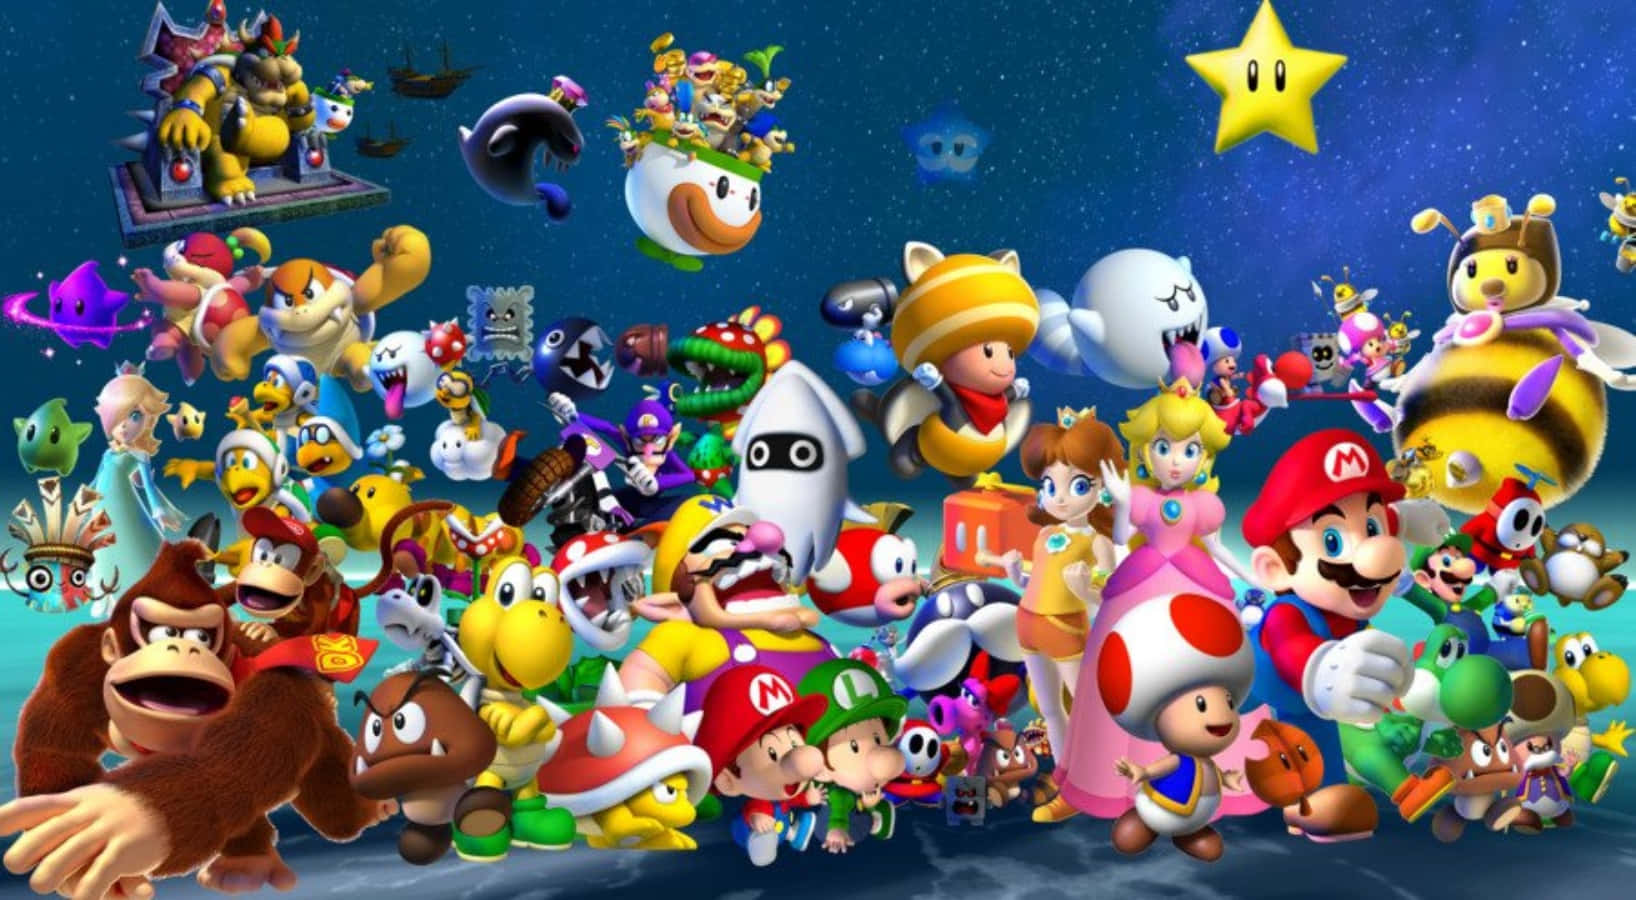 Super Mario Characters Assemble in a Stunning Wallpaper Wallpaper